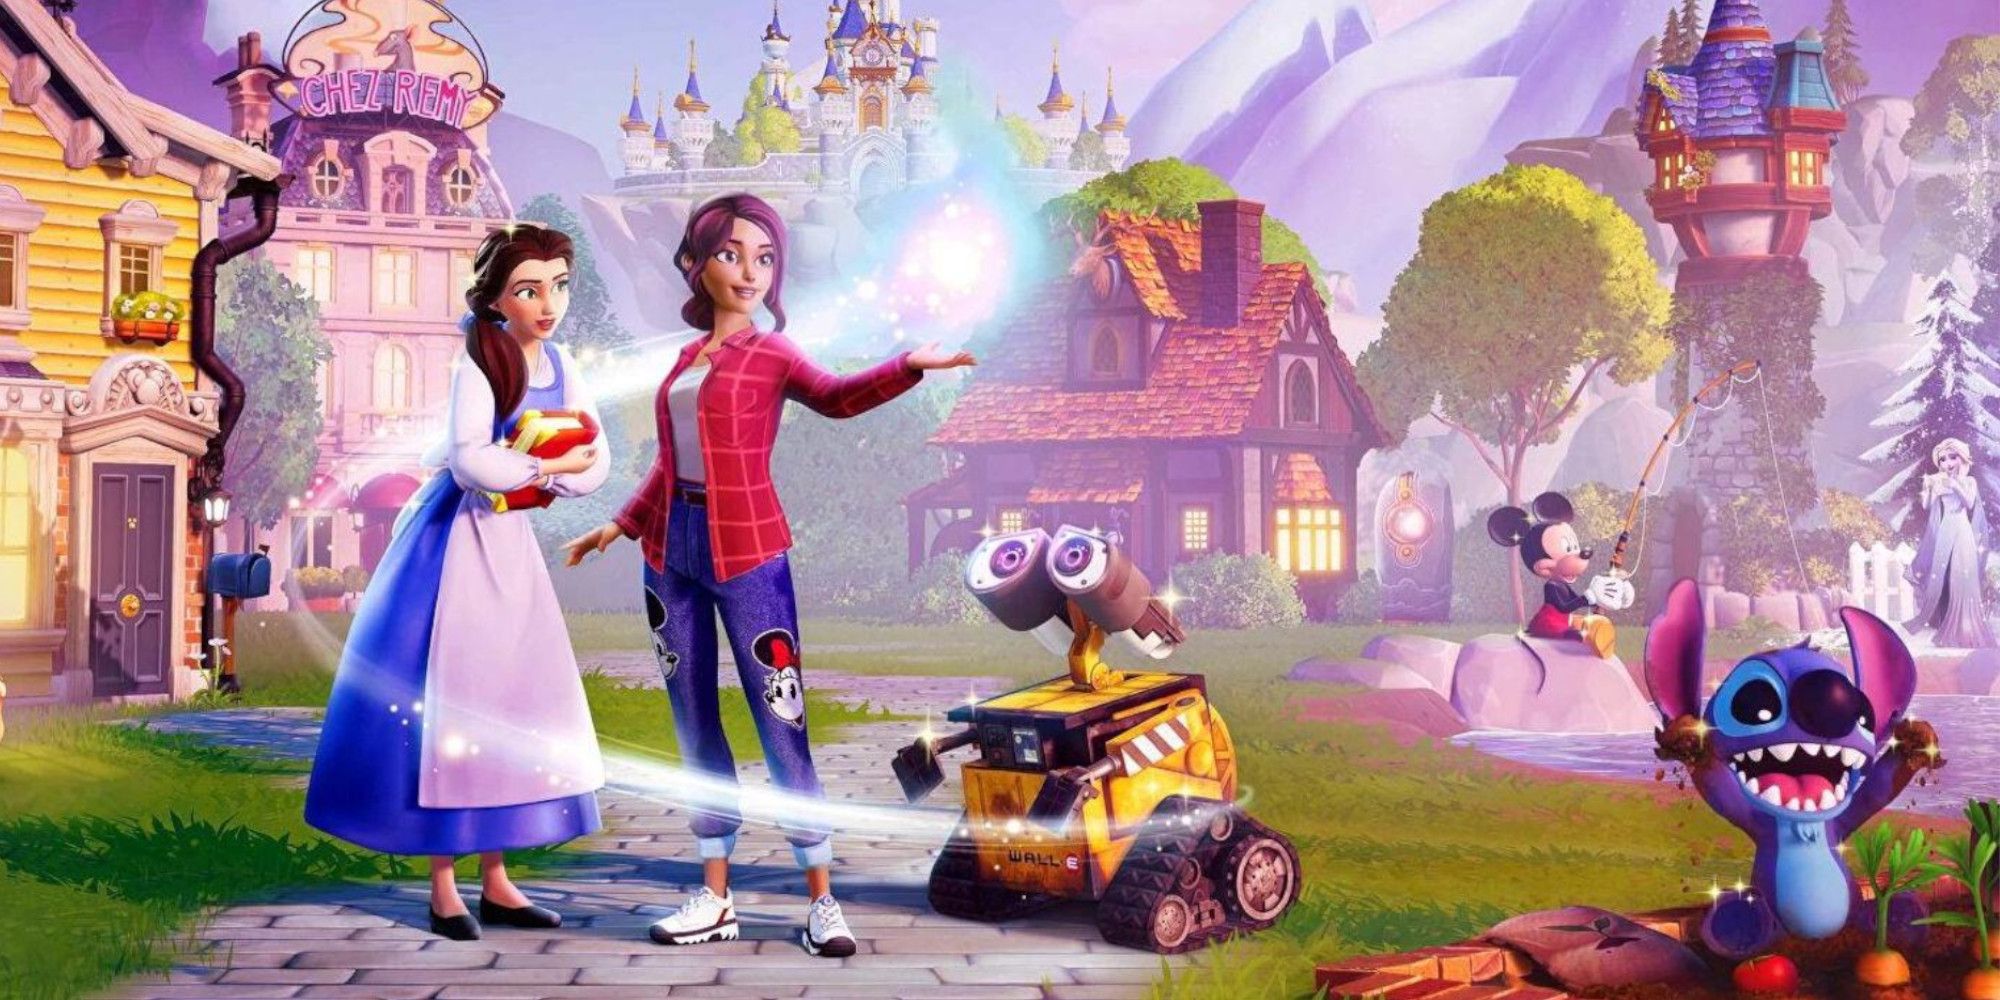 disney dreamlight valley promotional picture, showing the main character using maci and a bunch of Disney characters.